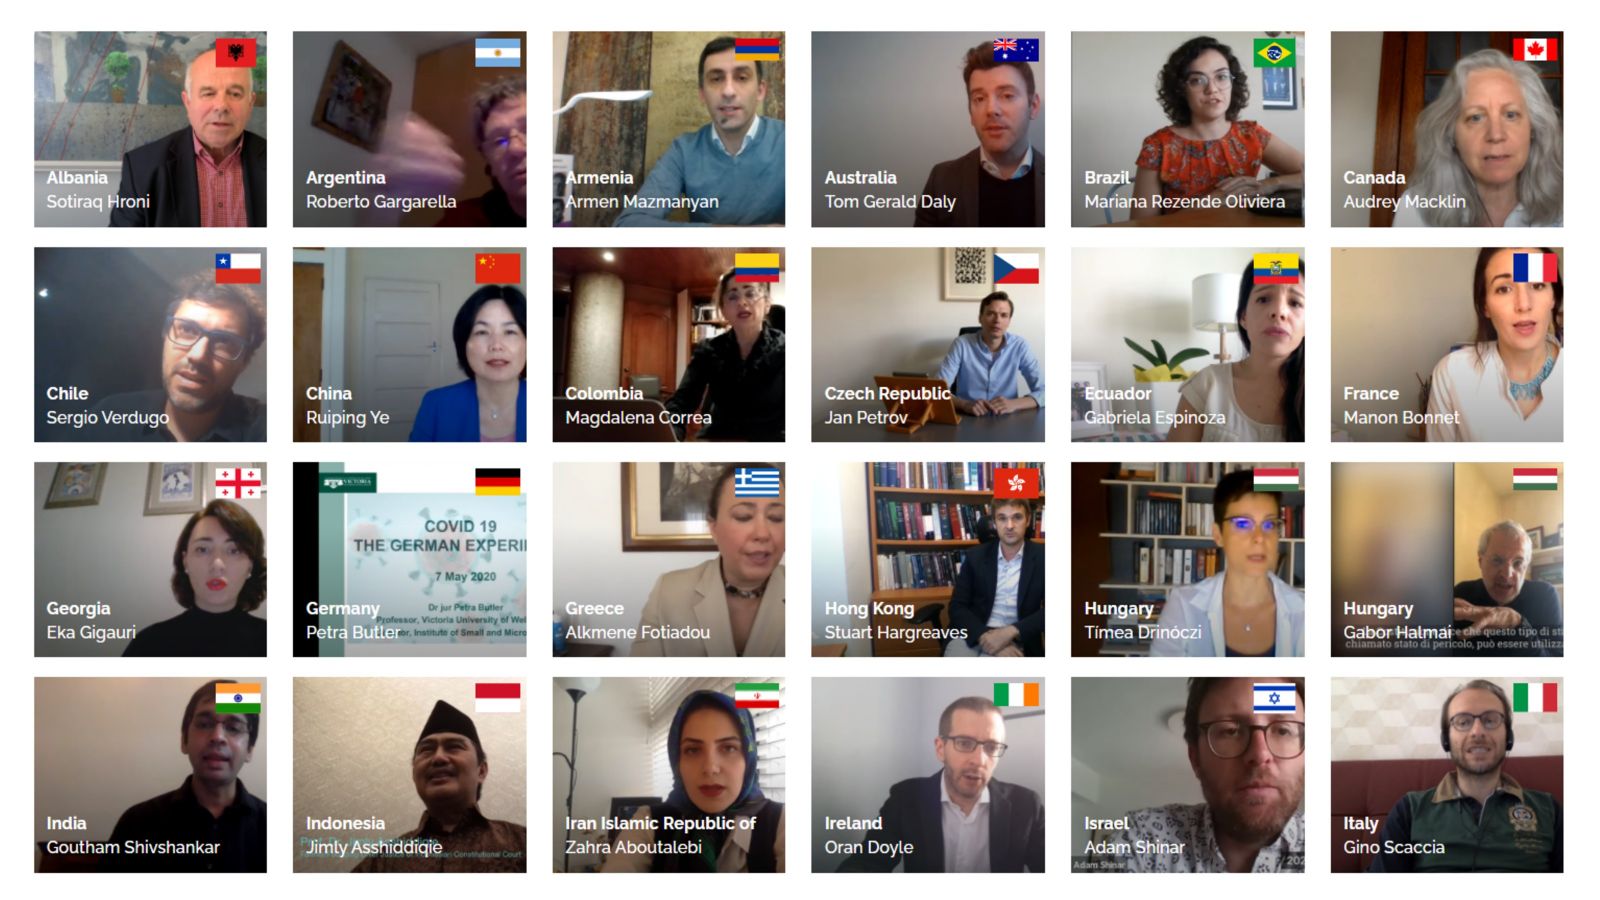 Grid of 24 shots of different people speaking via video conference with their respective nation's flag in the corner